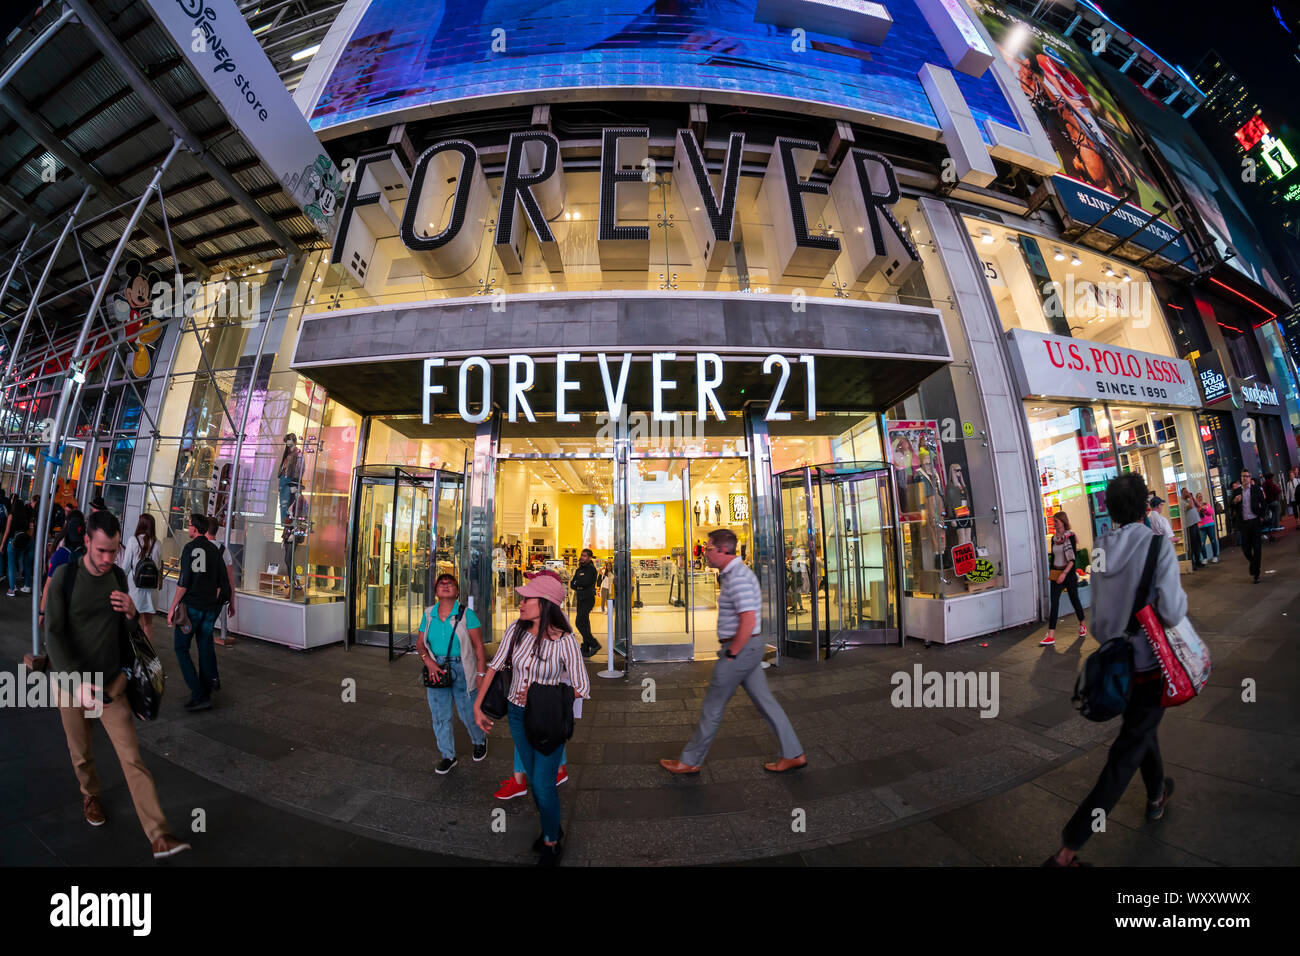 Forever 21 in Times Square Fined for Messiness - Racked NY